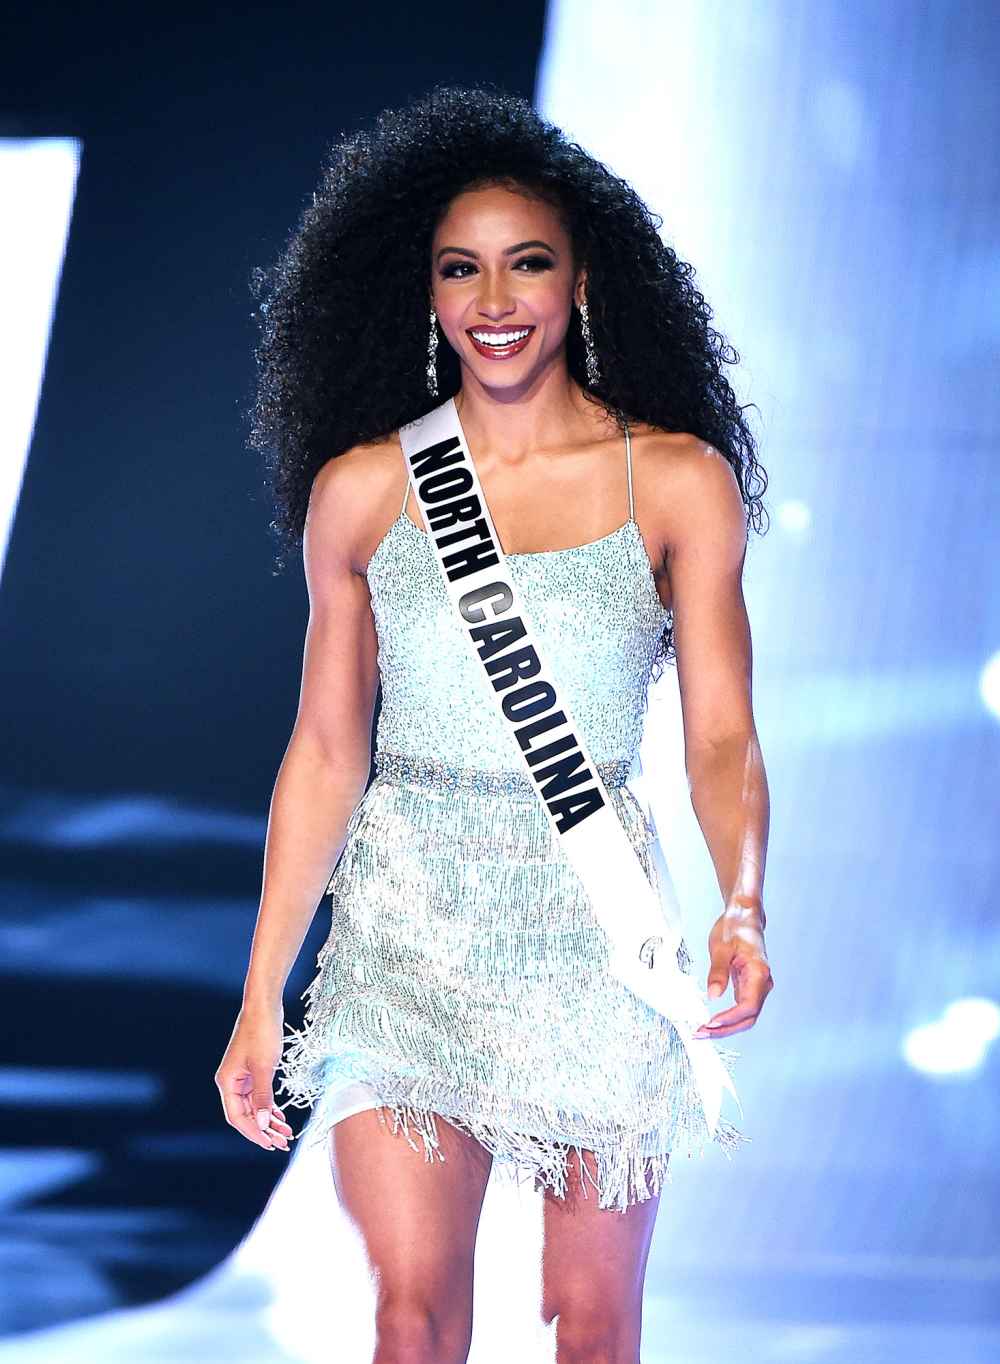 5 Things to Know About Miss USA's 2019 Winner North Carolina's Cheslie Kryst